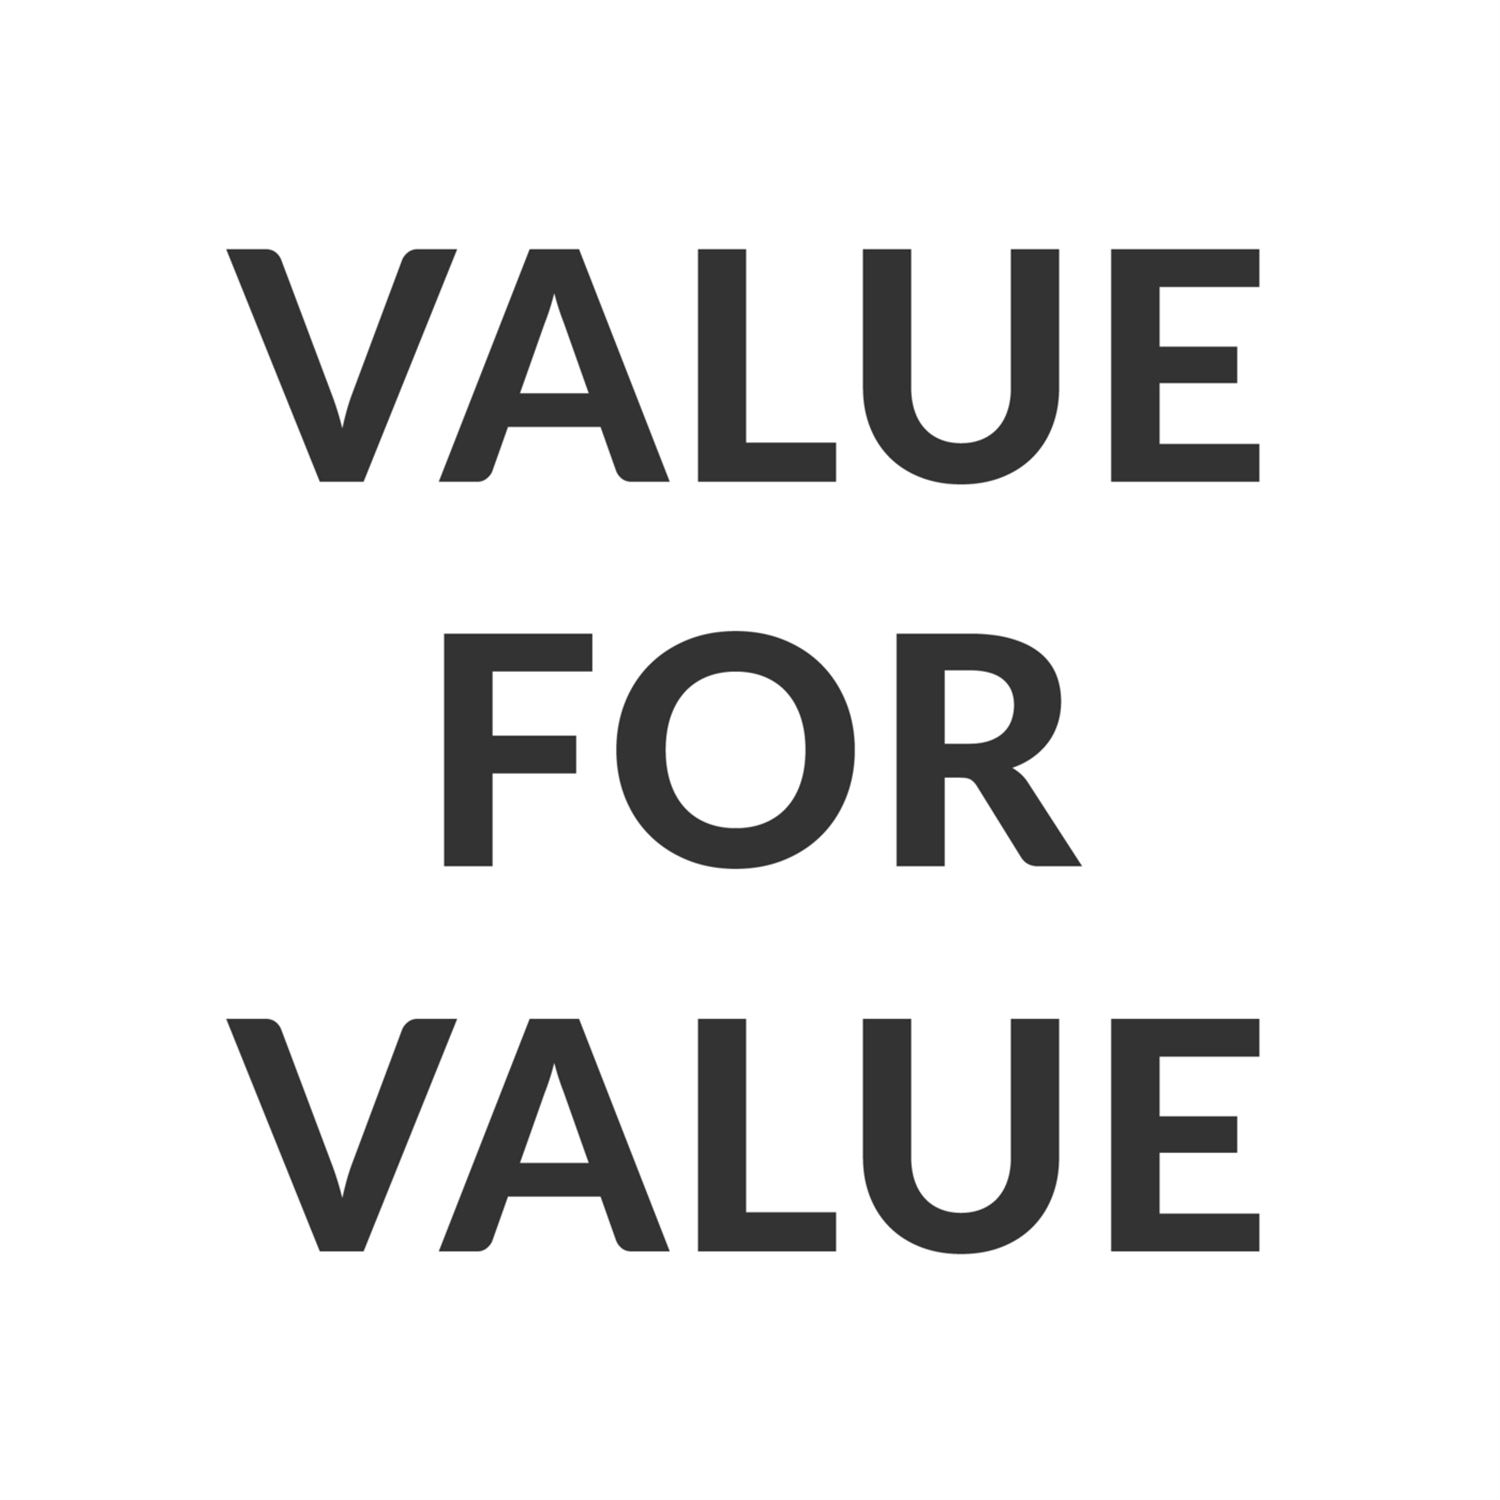 The coming change of Value For Value